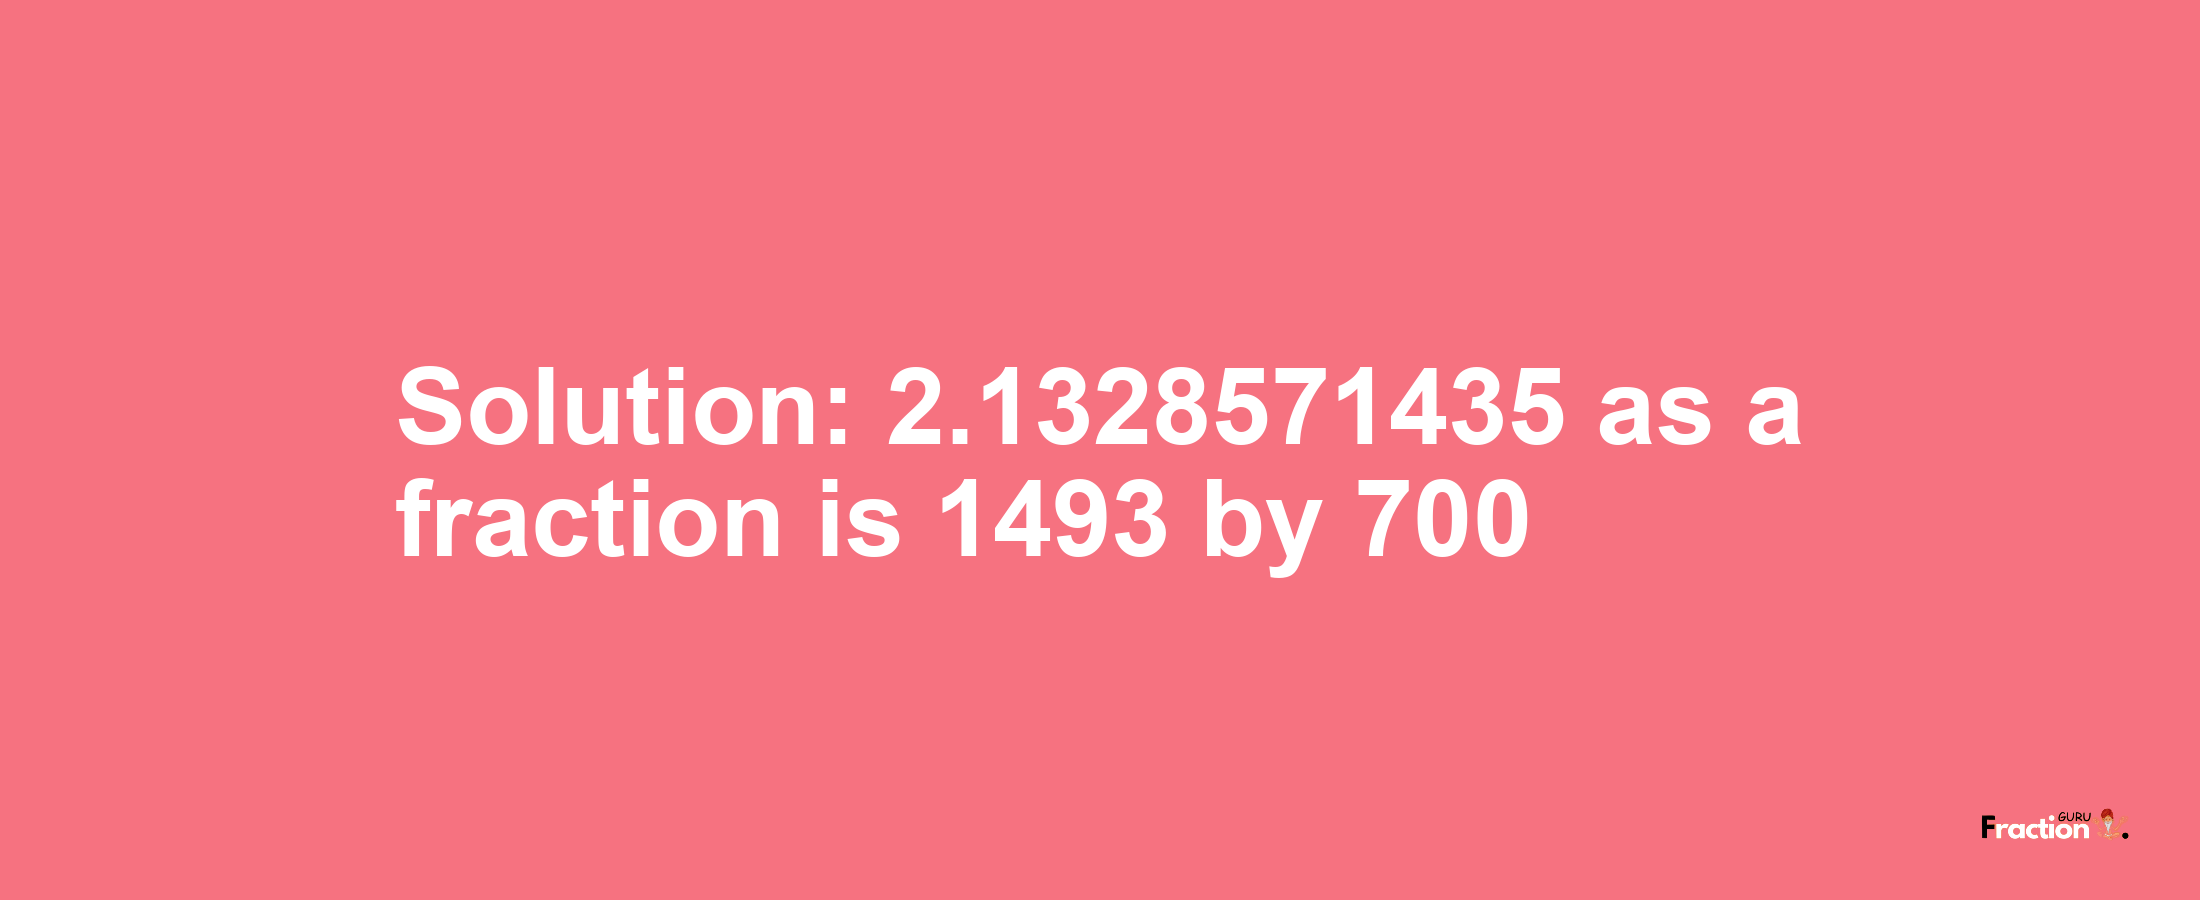 Solution:2.1328571435 as a fraction is 1493/700